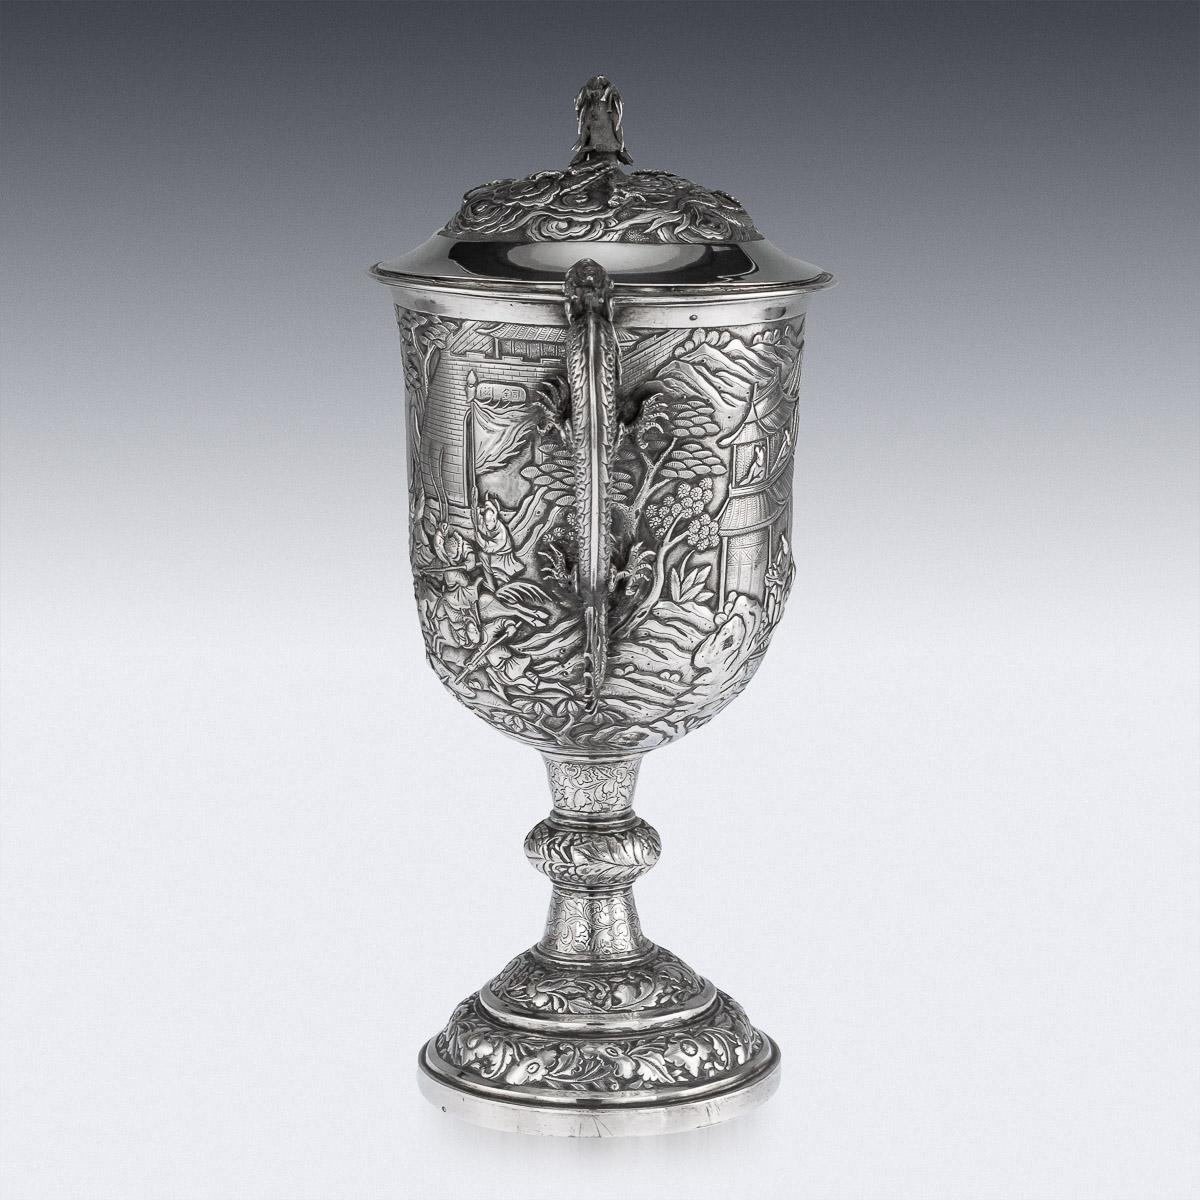 Antique mid-19th century Chinese export solid silver presentation cup and cover, of traditional shape and large size, the body is embossed with beautiful battle scenes in relief depicting Chinese warriors fighting amongst village landscape, applied